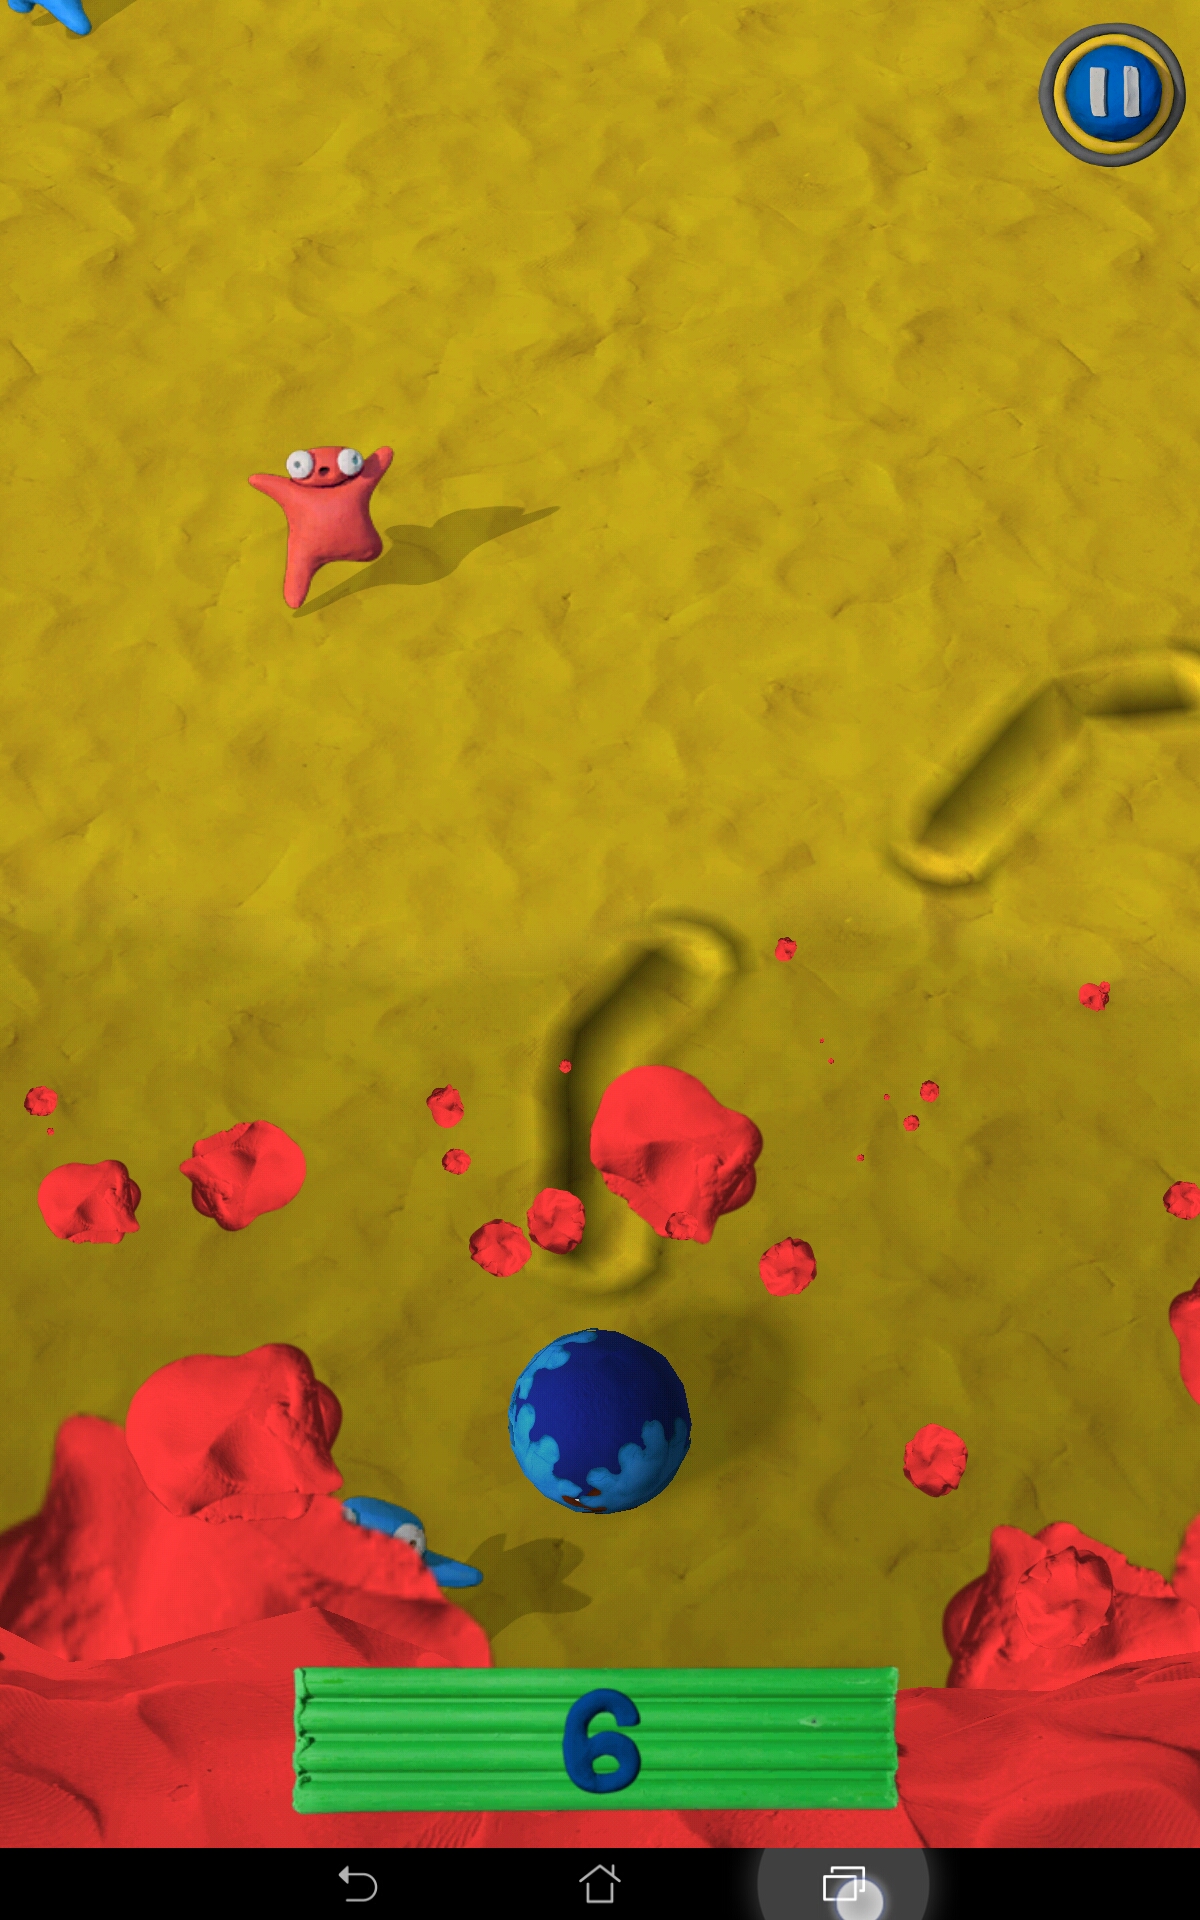 Clay Jam in game screenshot, where trenches dug with fingers guide the ball that will squish clay monsters to progress, while a red wave of clay indicates the player is about to lose and needs to move faster.